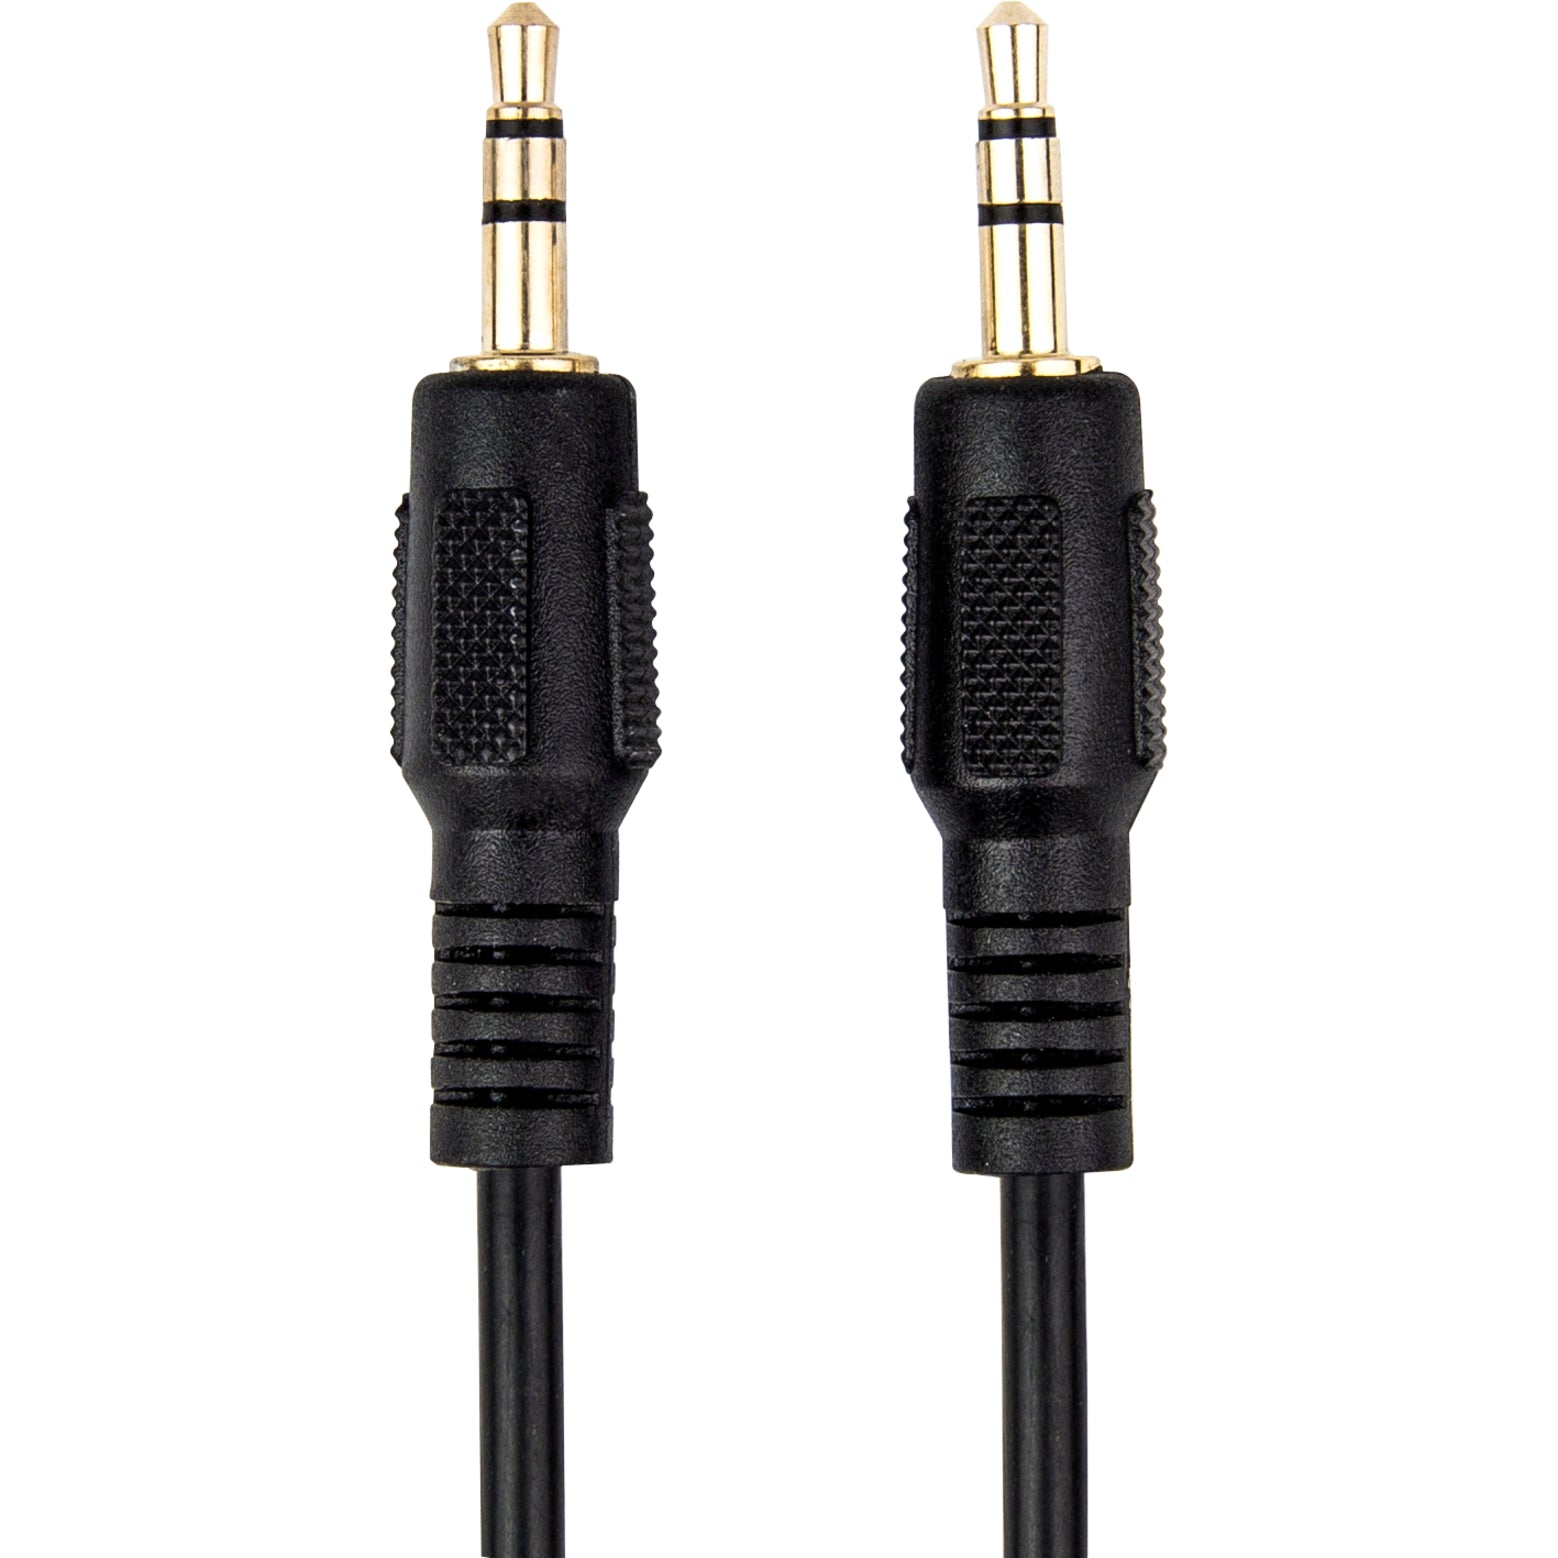 Rocstor Y10C188-B1 Premium 3 ft Slim 3.5mm Stereo Audio Cable, Gold Plated, Black